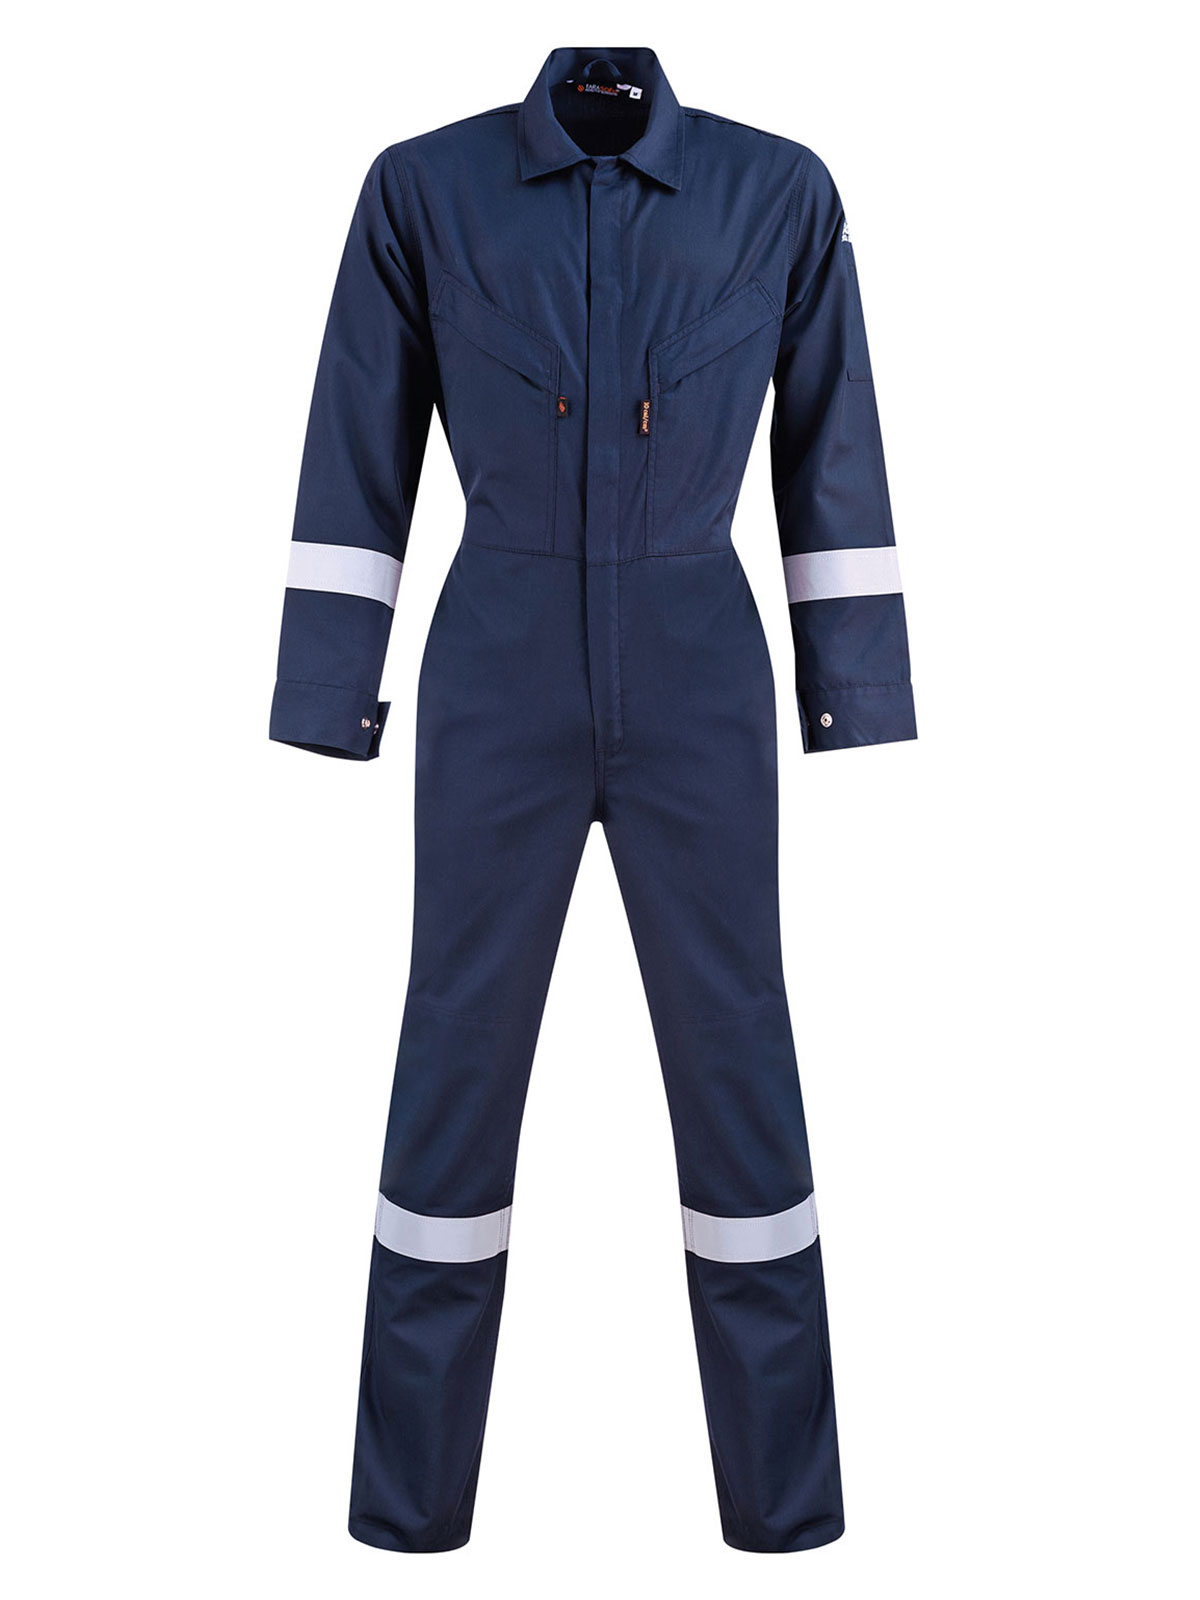 FR Coveralls - Superior Quality Industrial Flame Resistant Coveralls